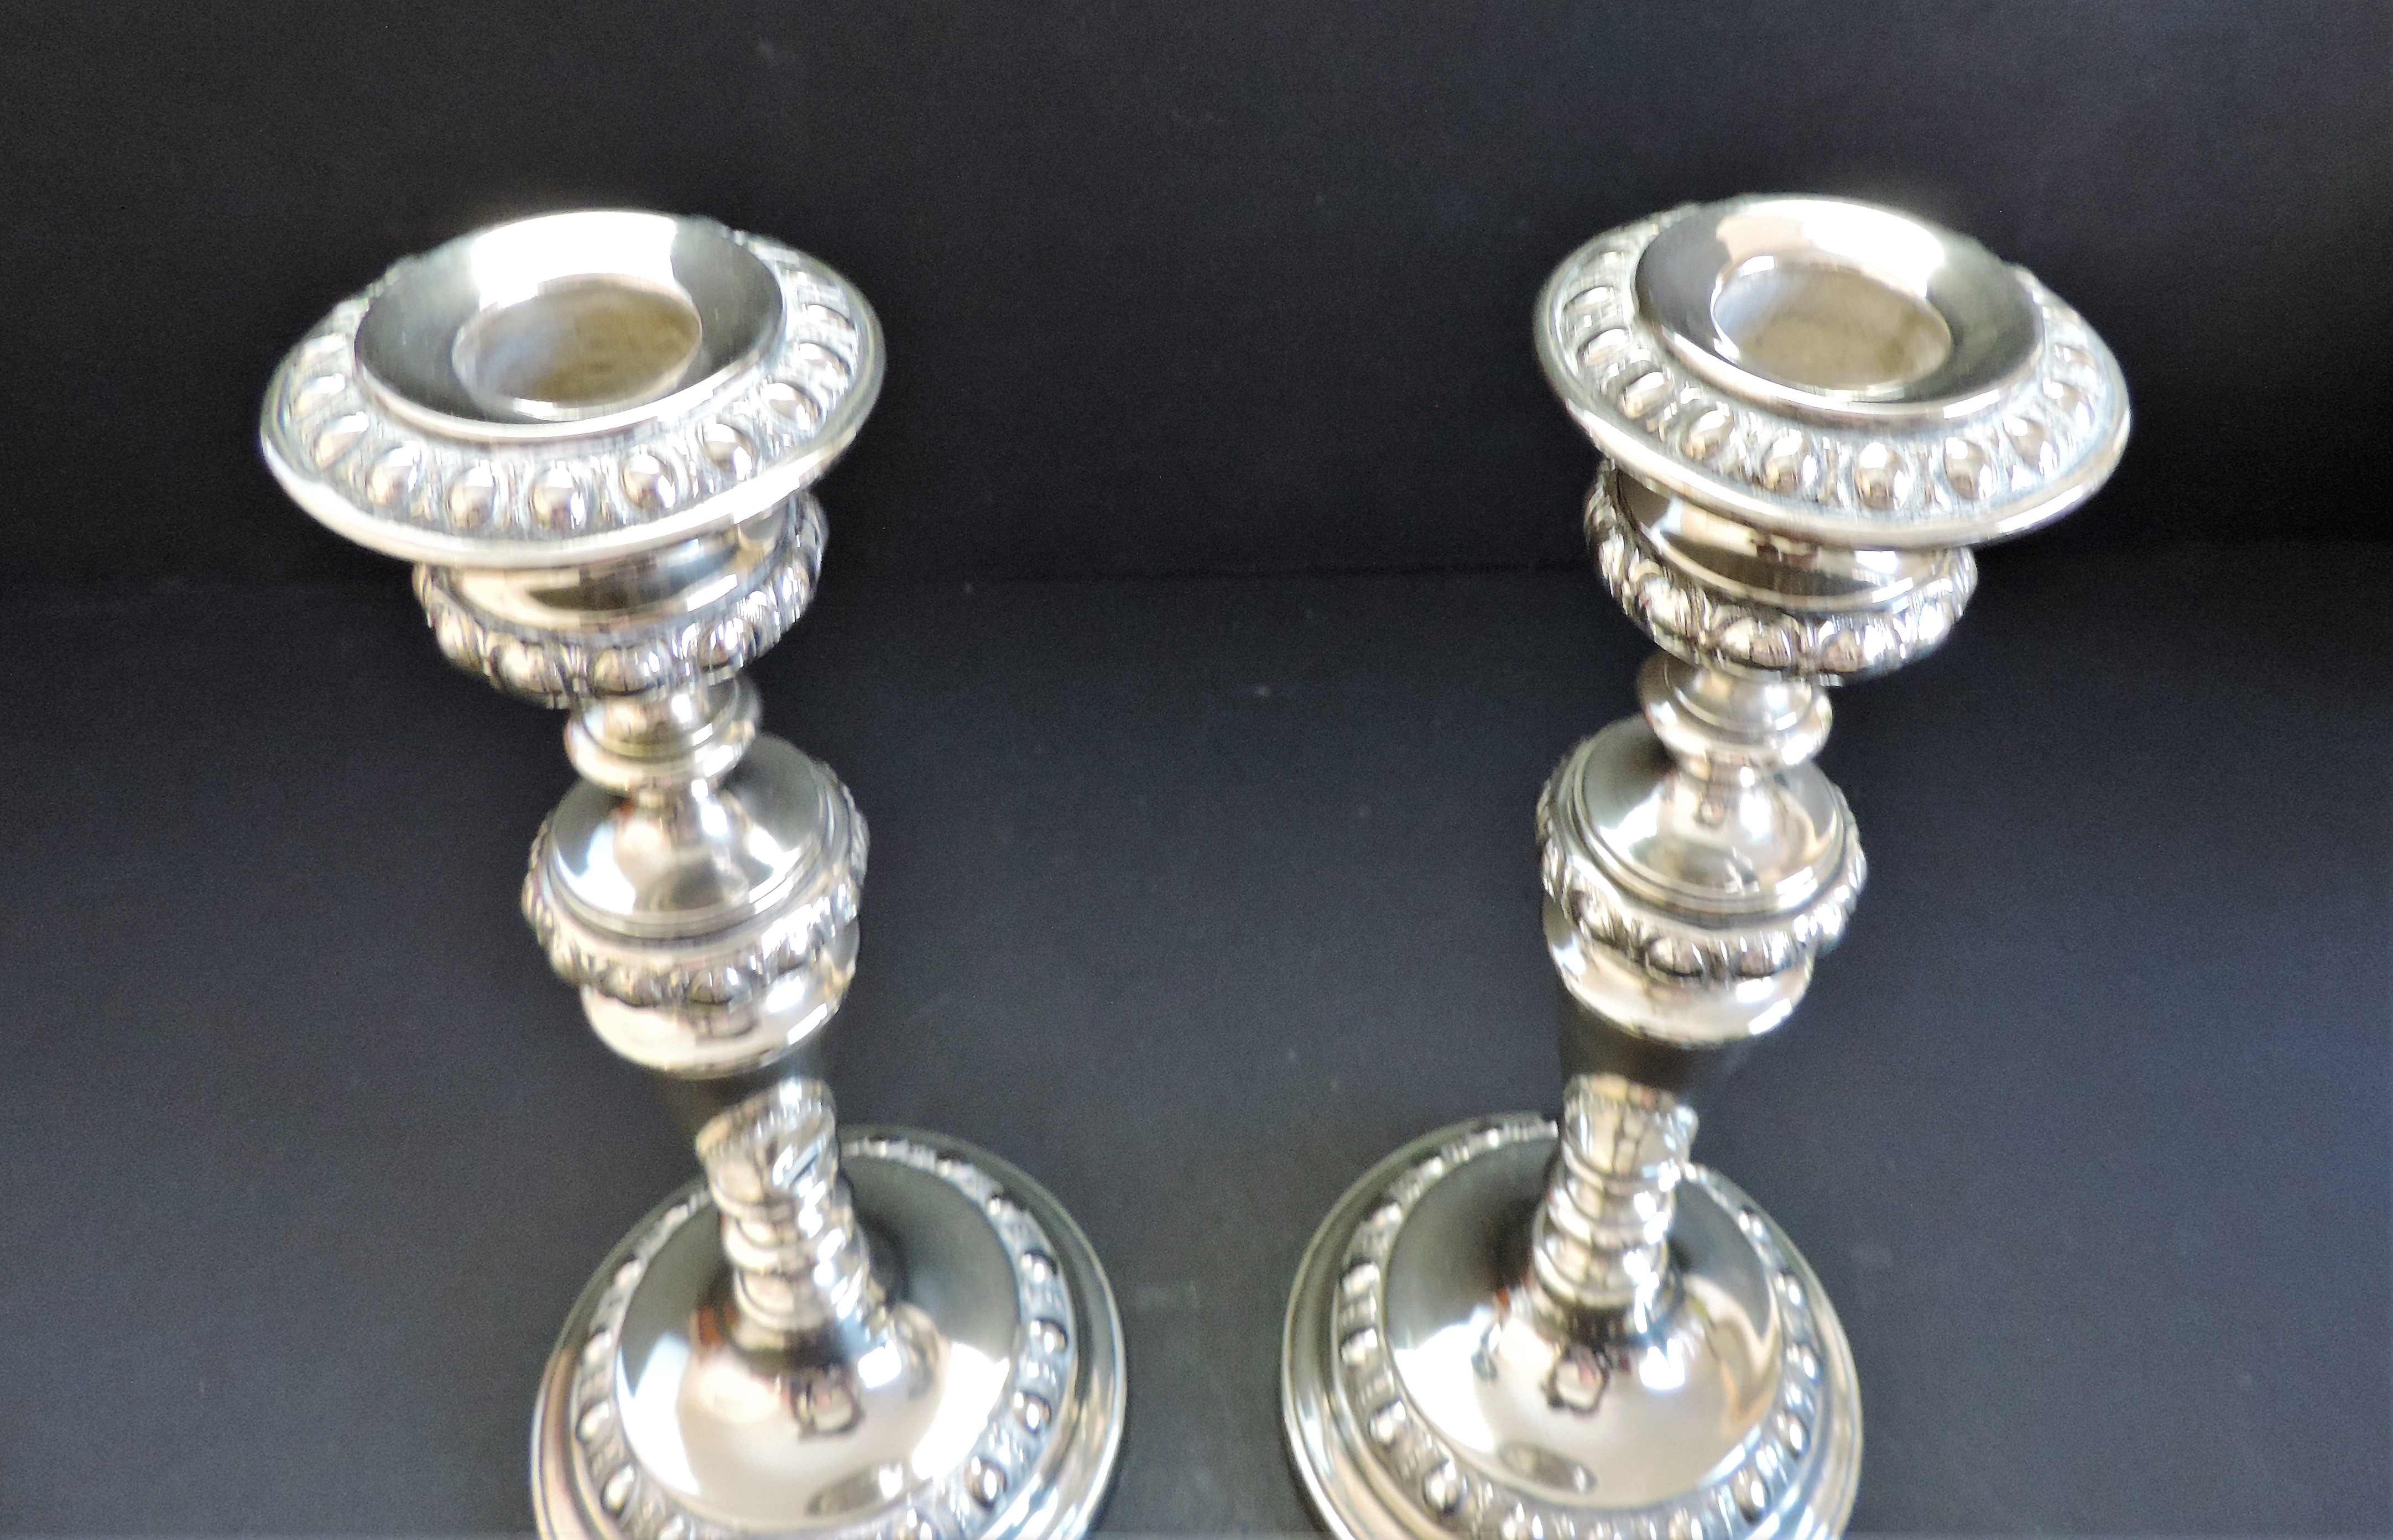 Pair of Antique Ornate Silver Plated Candle Sticks - Image 3 of 4